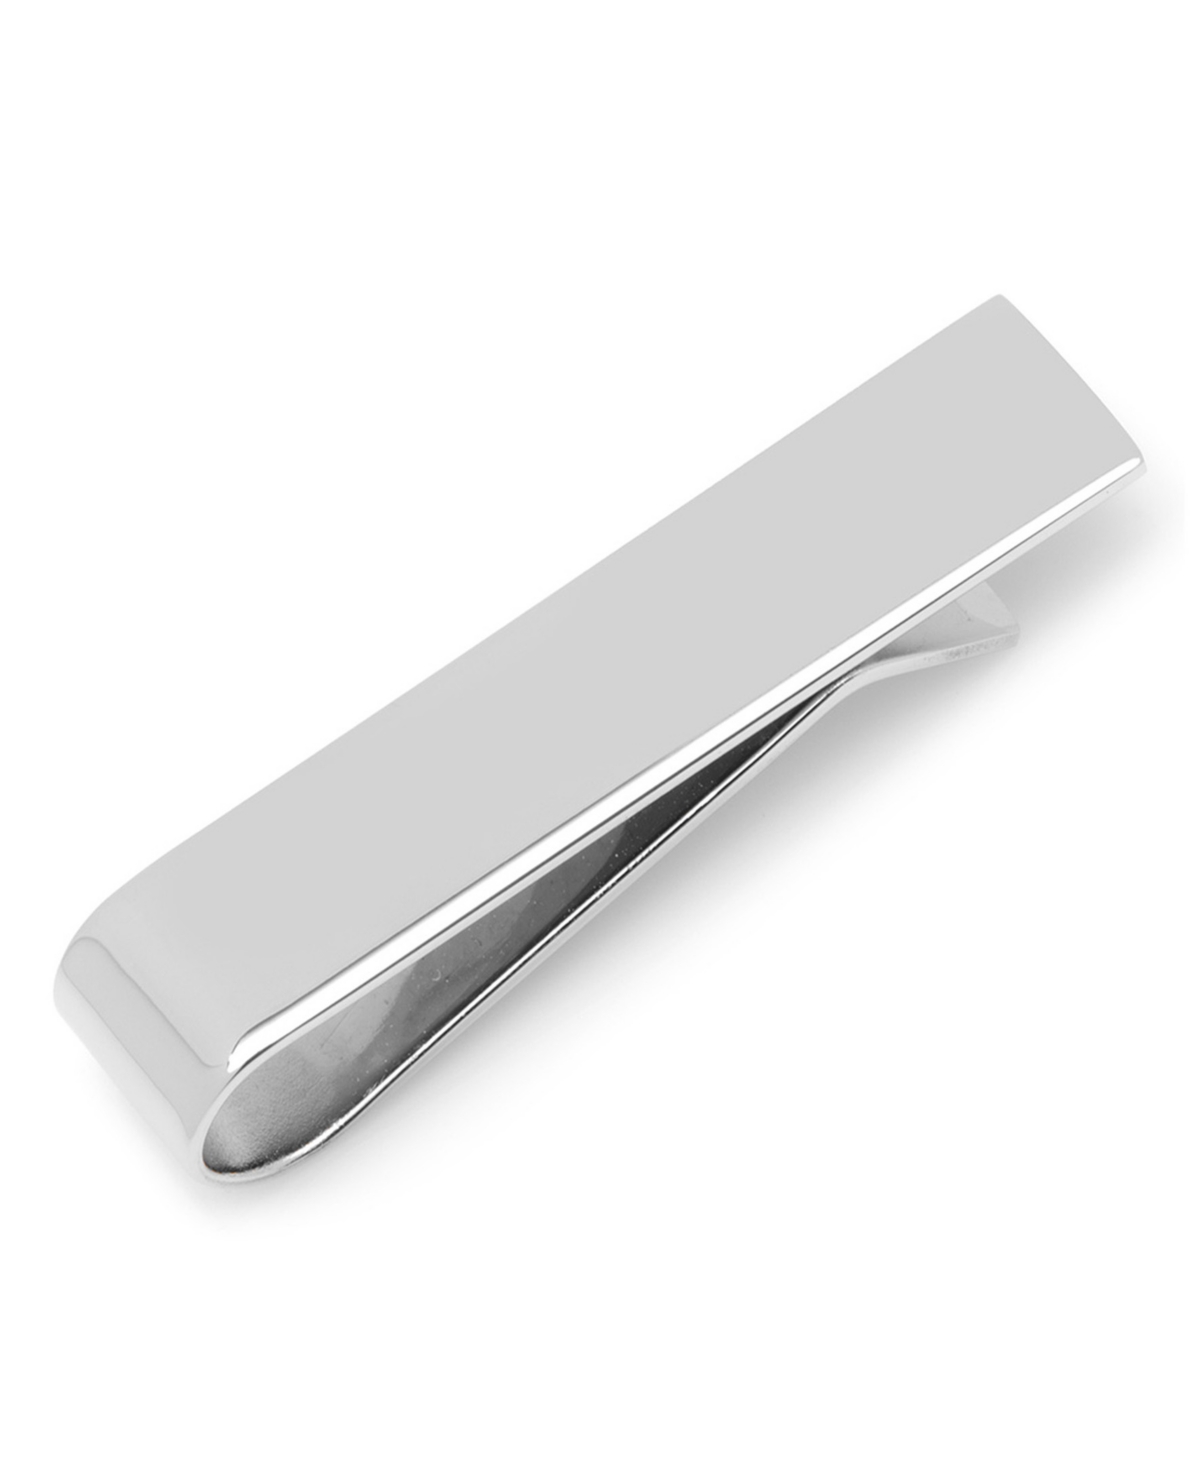 Ox and Bull Trading Co. Short Stainless Steel Engravable Tie Bar - Silver-Tone